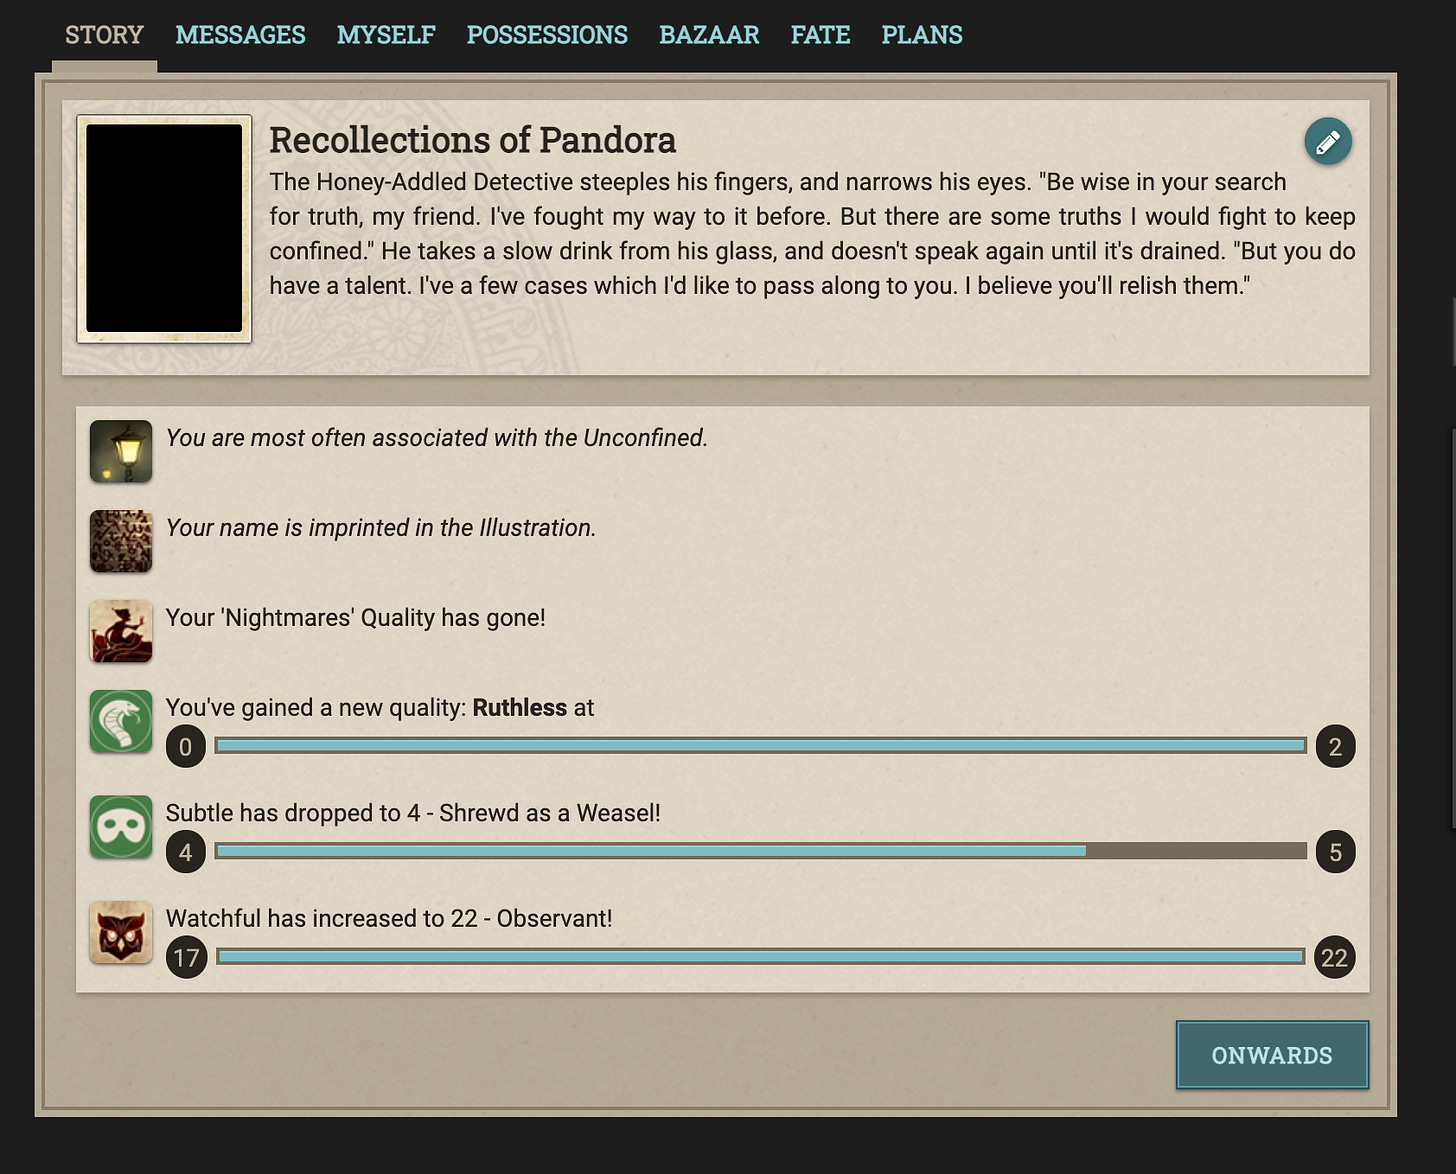 Screenshot of Fallen London showing a more modern web interface, featuring the storylet "Recollections of Pandora."